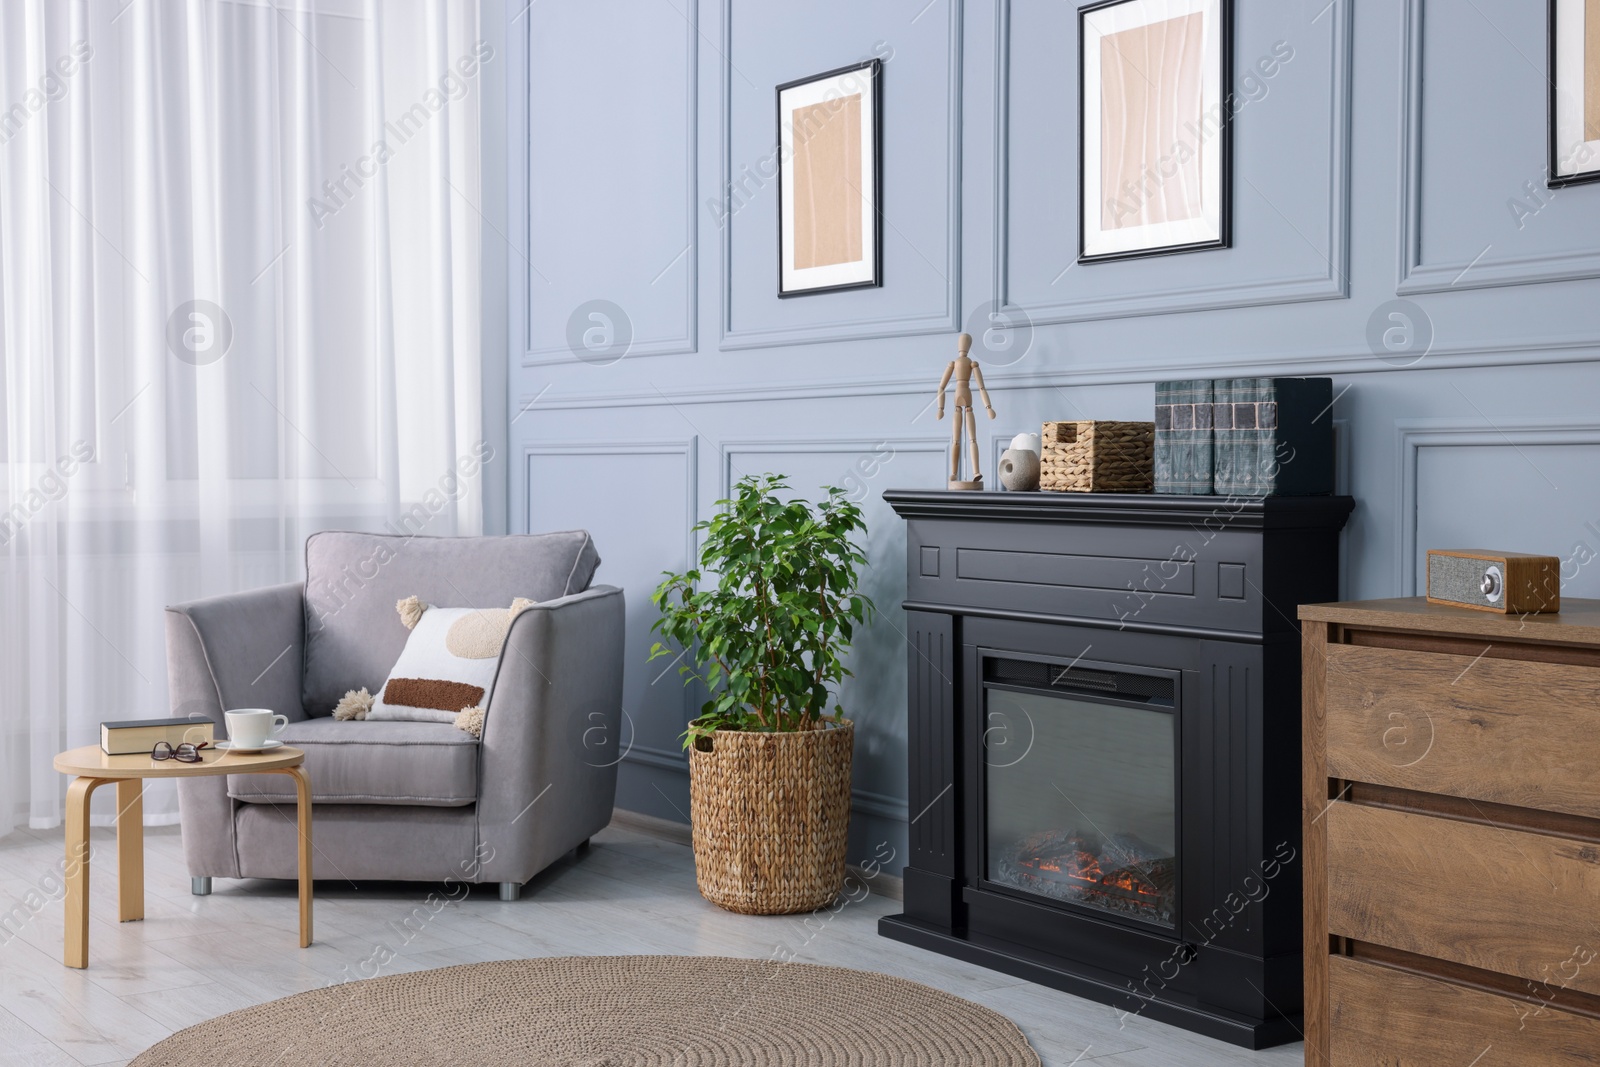 Photo of Black stylish fireplace near potted plant and armchair in cosy living room